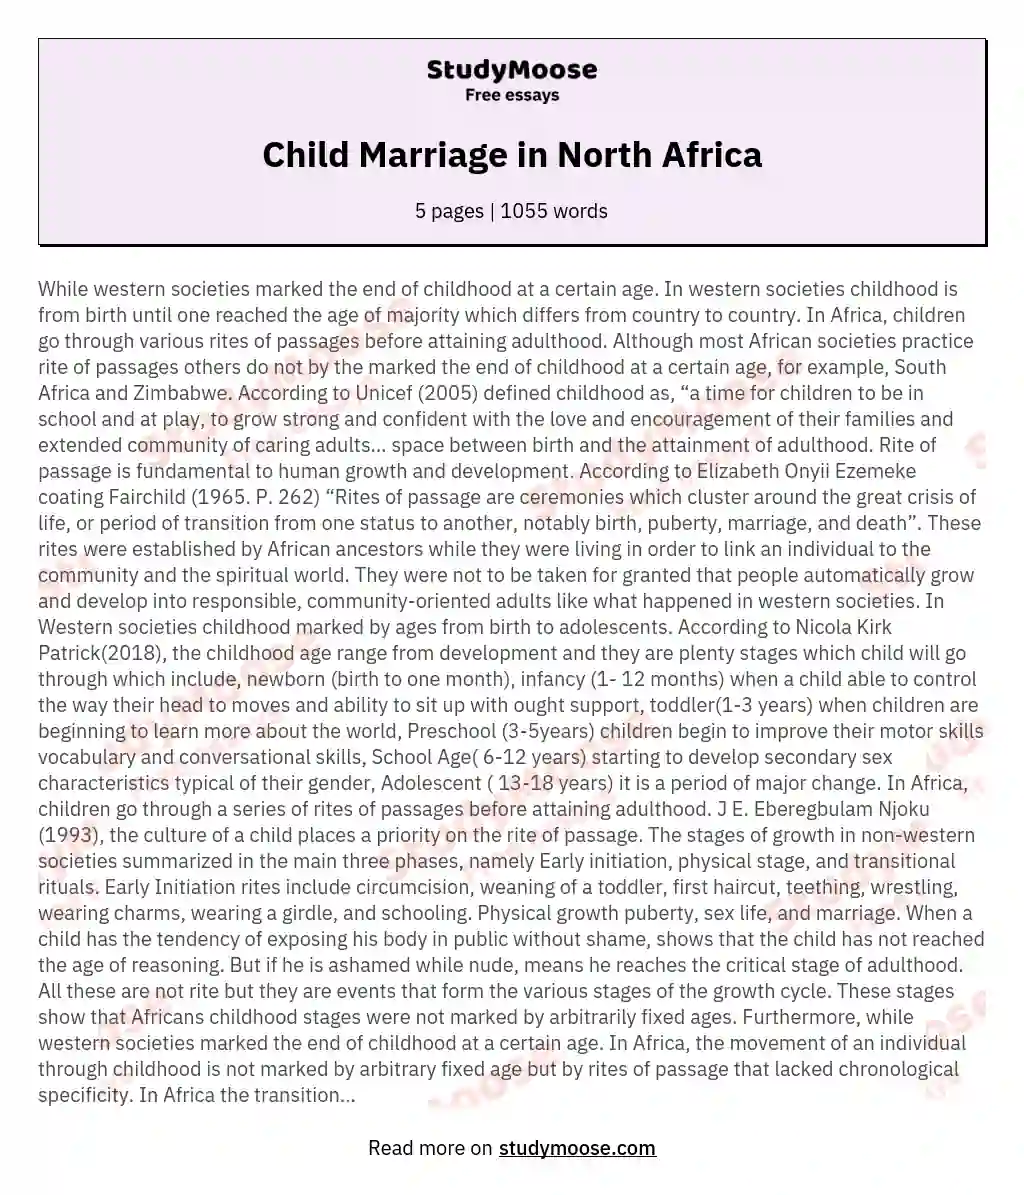 Child Marriage in North Africa essay